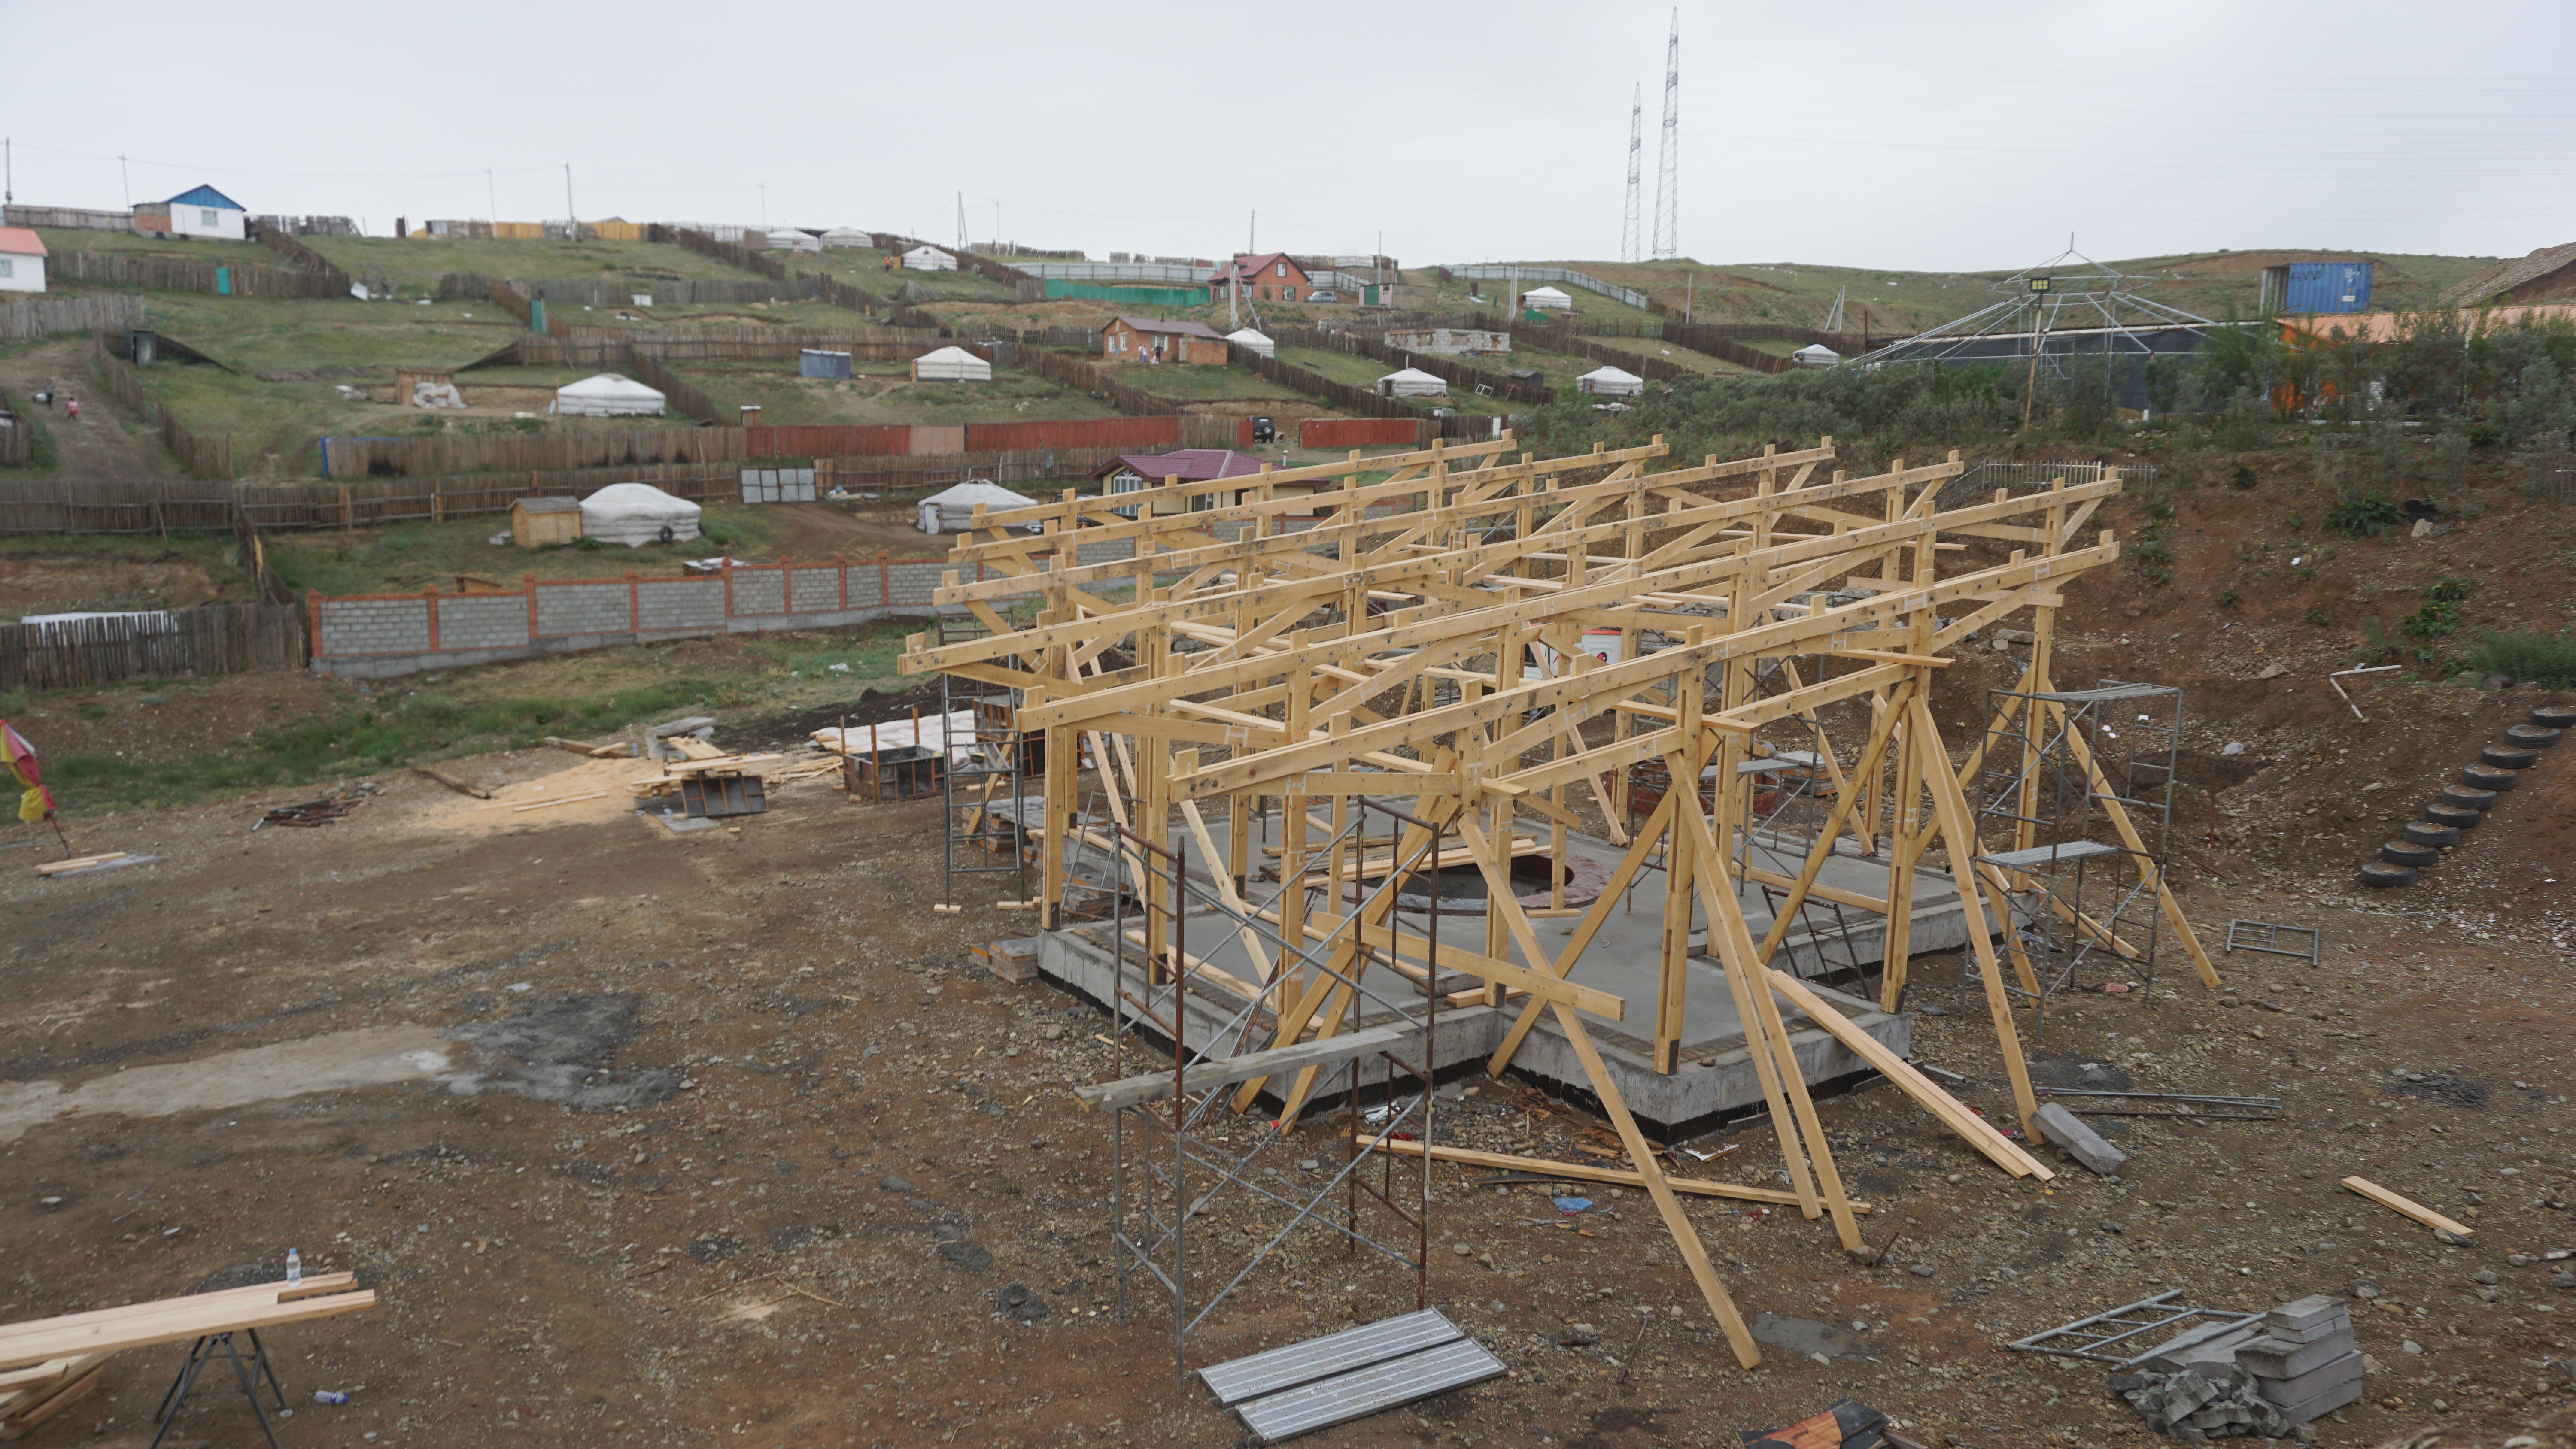 Poured concrete base with a laticced wooden framework roof mid-construction. Individual ger plots can be seen on the hills in the distance. 